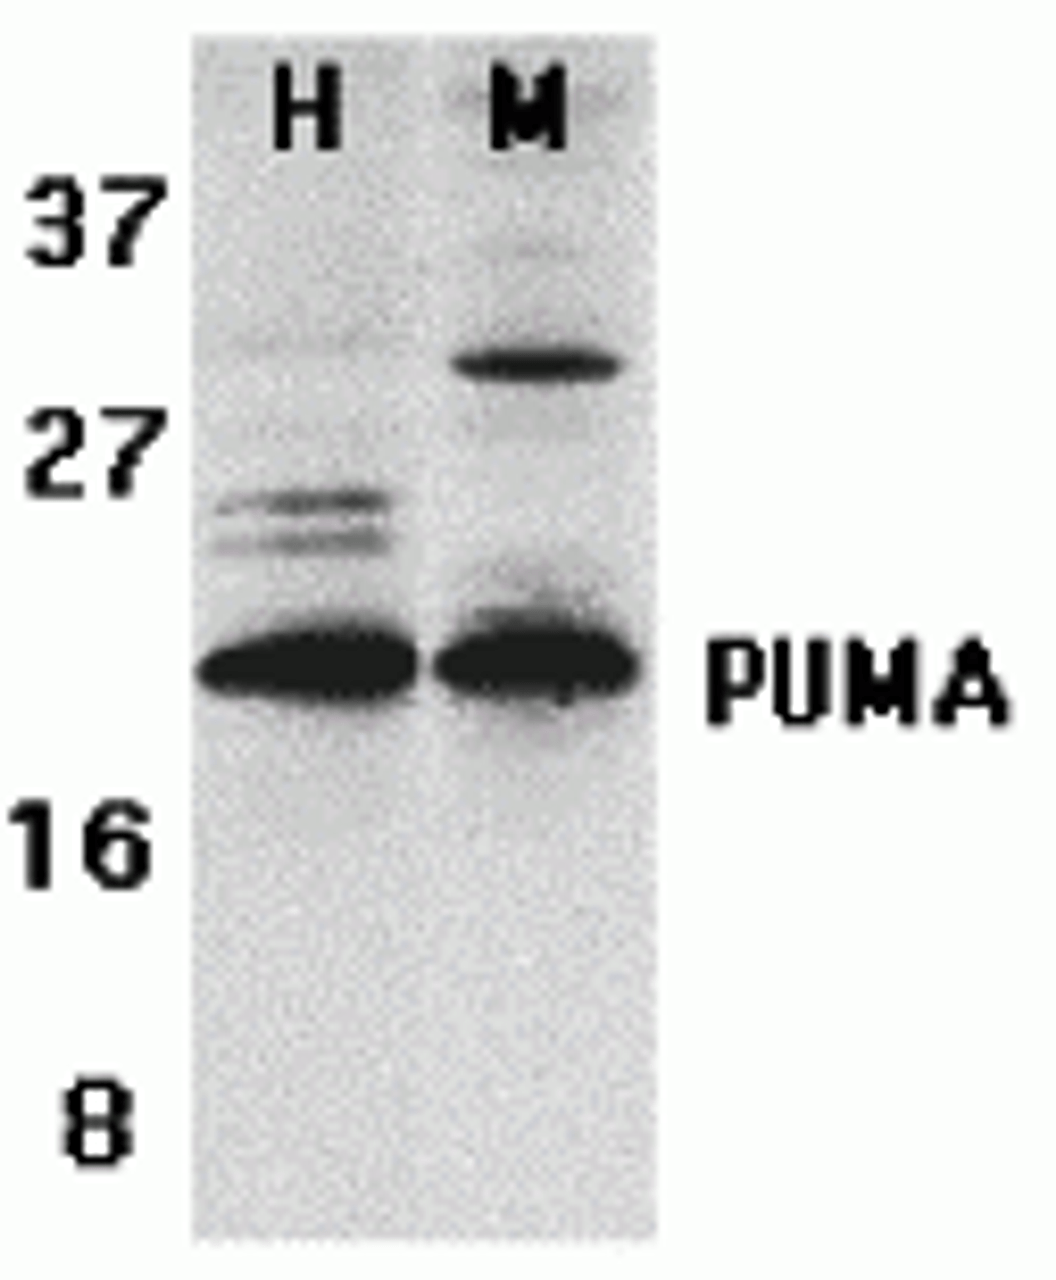 Figure 1 Western Blot Validation of PUMA in K562 and 3T3/NIH Cells
Loading: 15 &#956;g of lysates per lane.
Antibodies: 3041 (2 &#956;g/mL) , 1 h incubation at RT in 5% NFDM/TBST.
Secondary: Goat anti-rabbit IgG HRP conjugate at 1:10000 dilution.